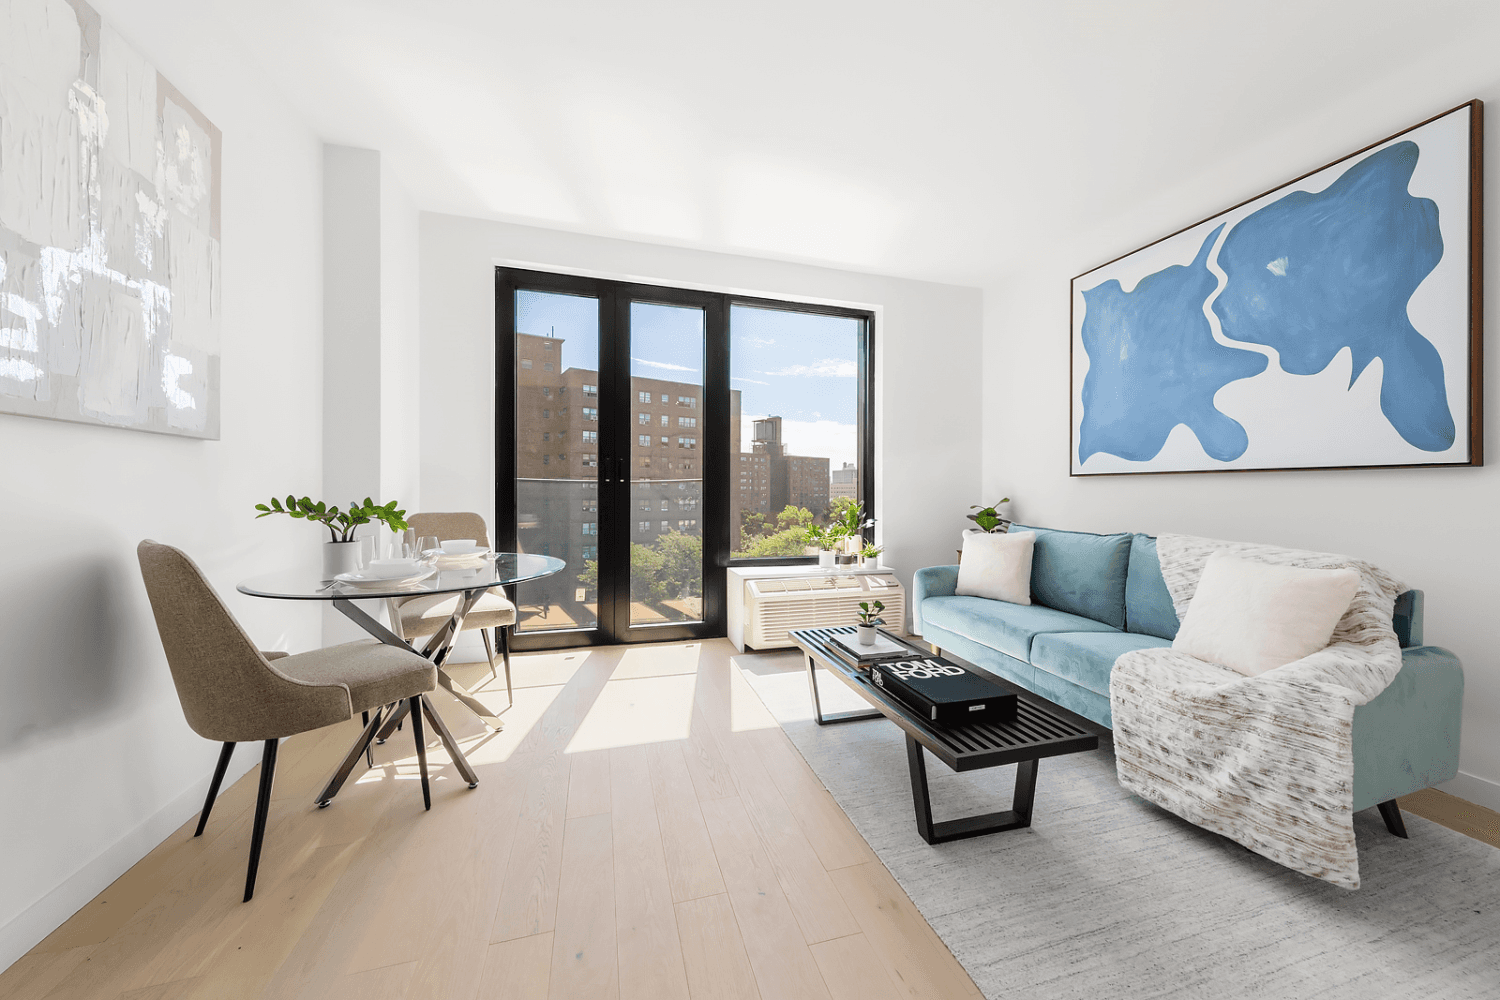 Move right into this stunning 1 bedroom, 1 bathroom home plus home office and enjoy a contemporary lifestyle at East Harlem's newest development.